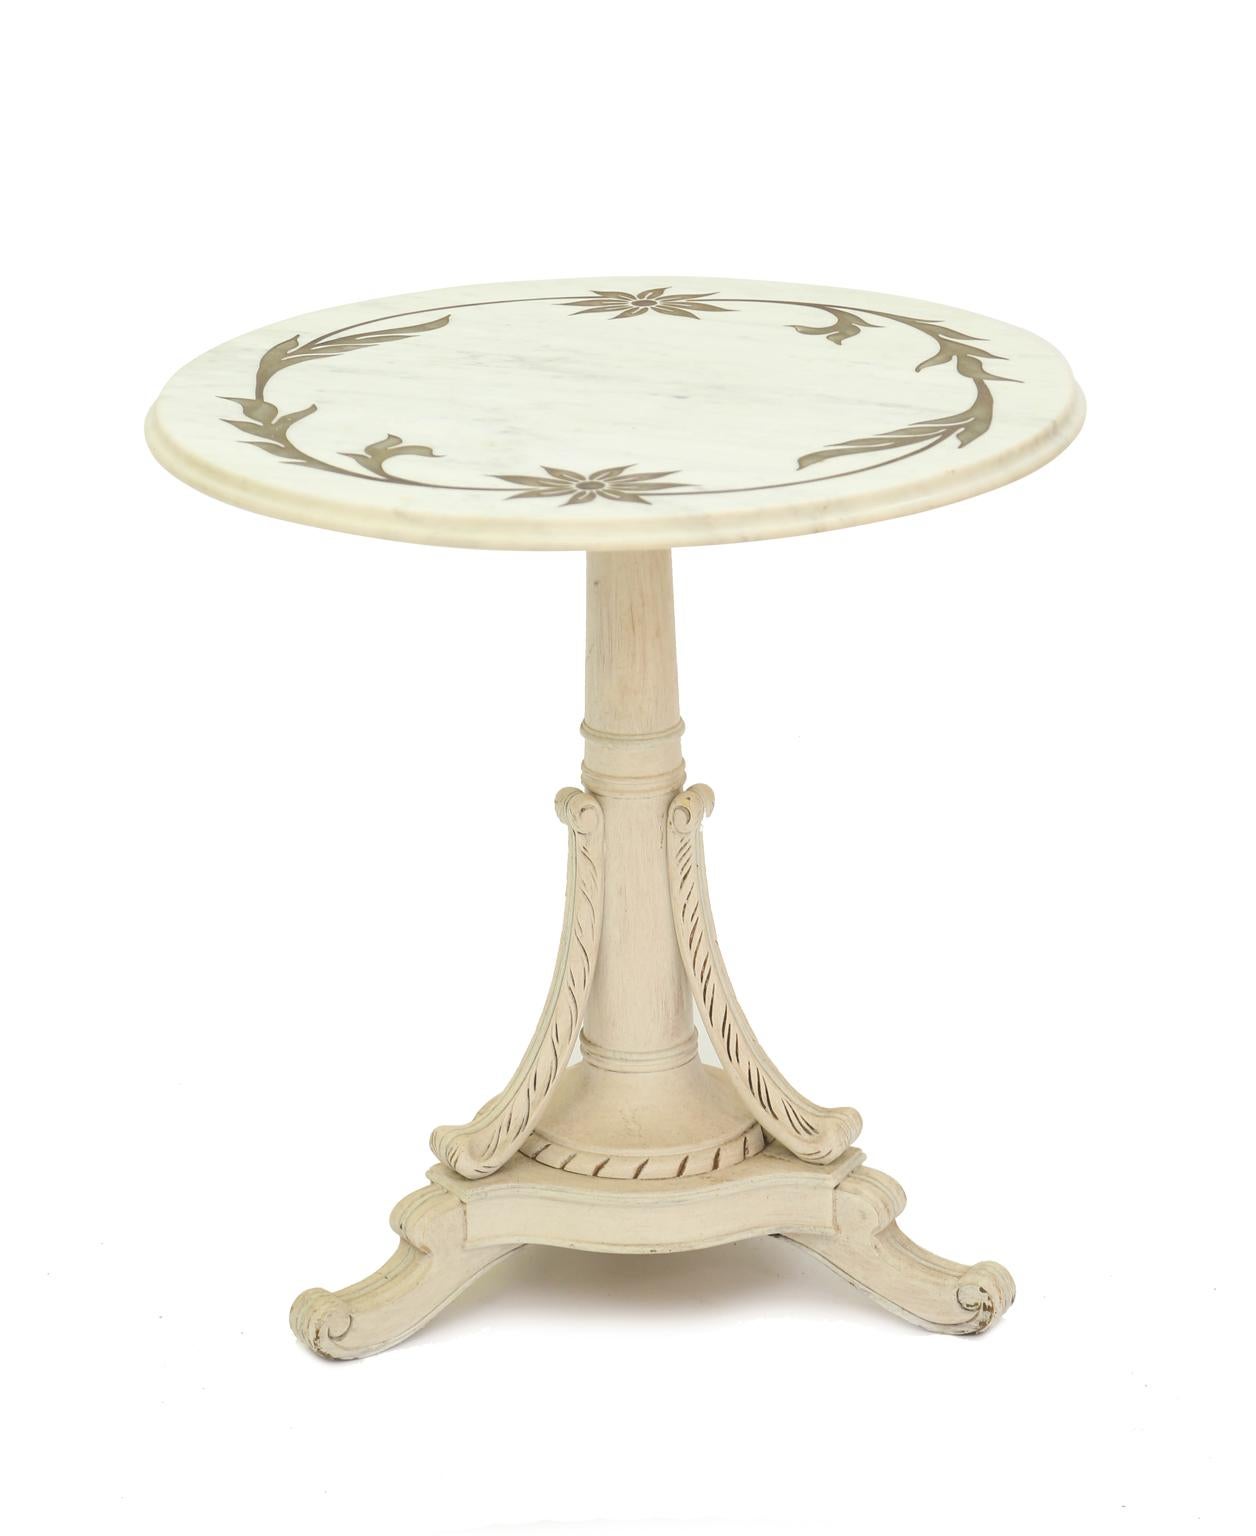 Pair of end tables, each having a round top of marble, with foliate and floral motifs of inlaid bronze, raised on painted pedestal base of a tapering column flanked by three C-scrolls, on tripartite base with concave sides, ending in splayed